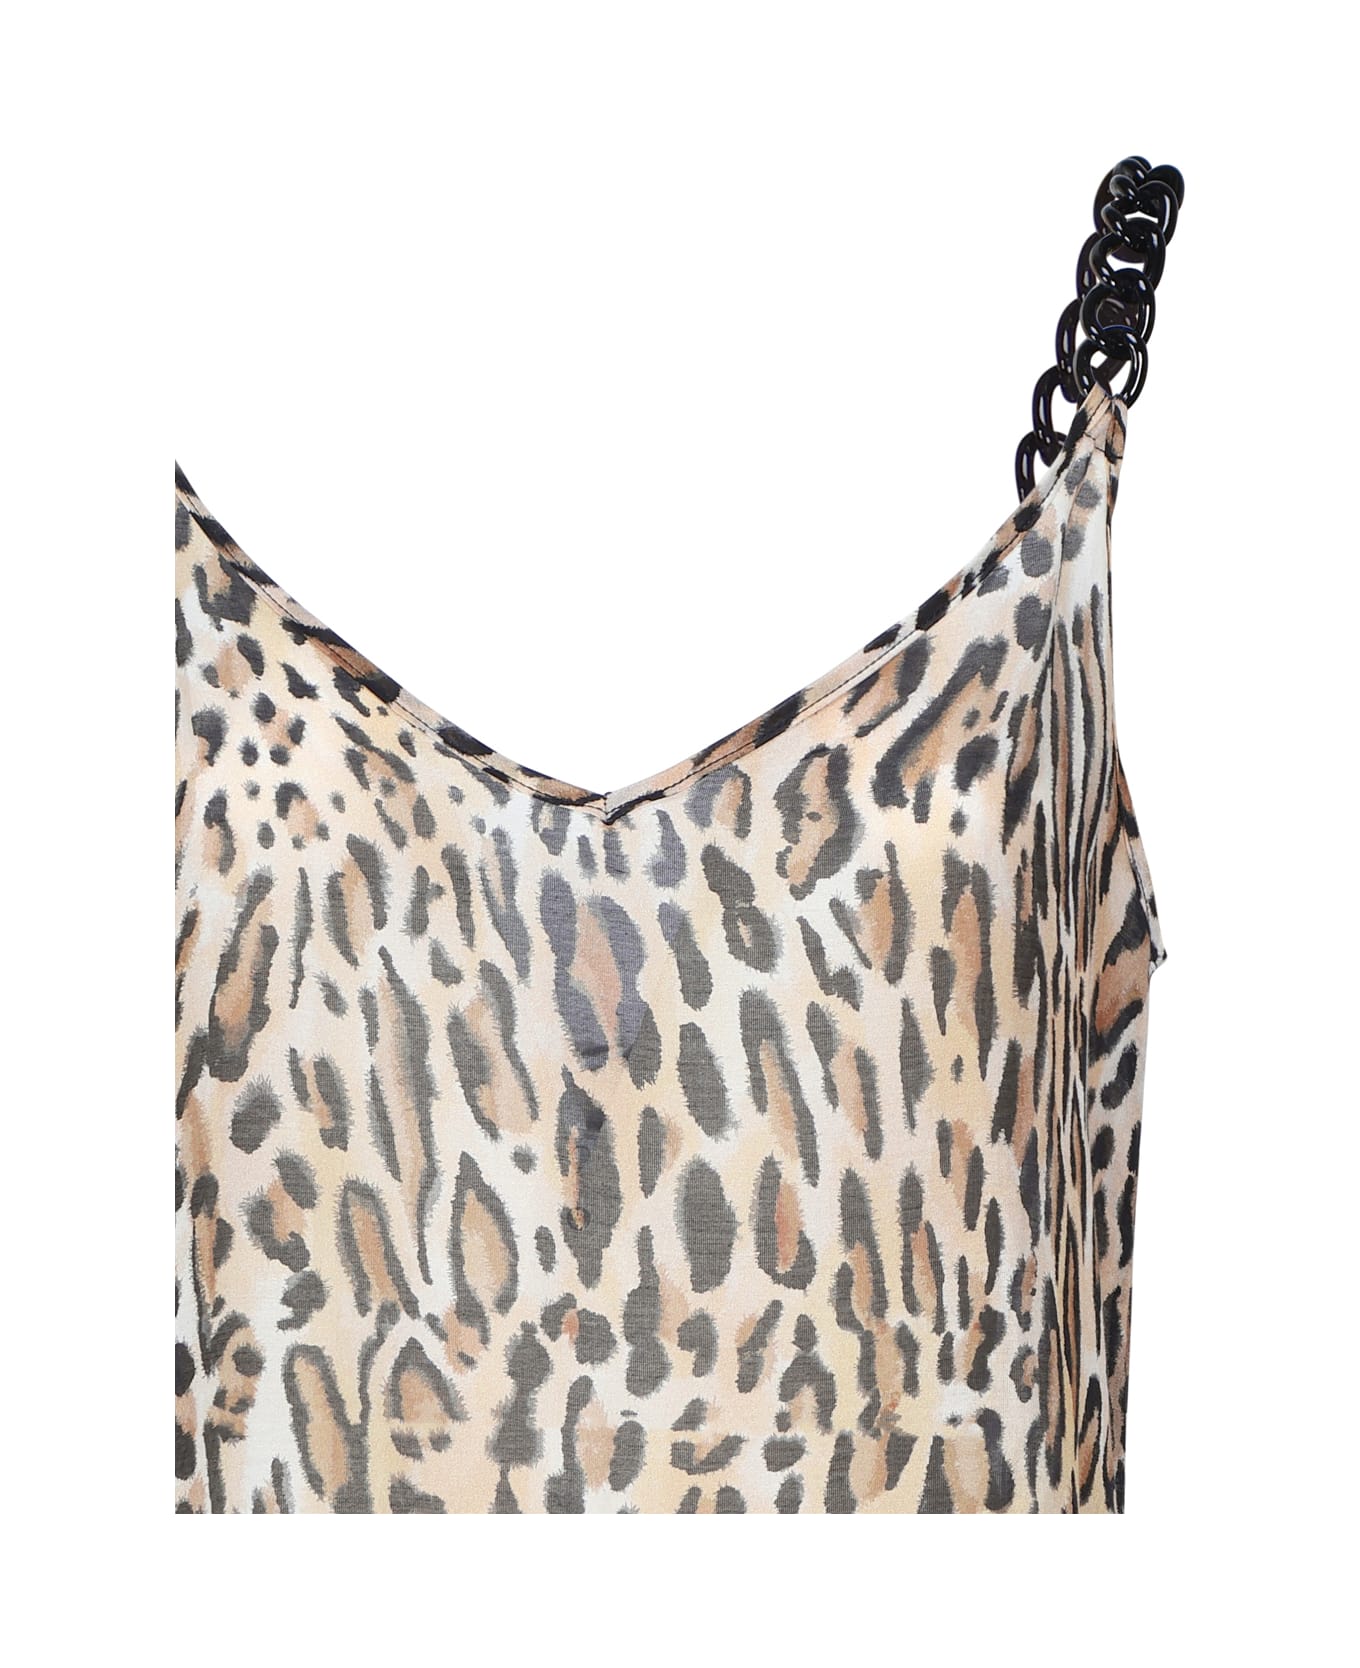 Moschino Leopard Print Silk Blend Dress - Fantasy print only one colour